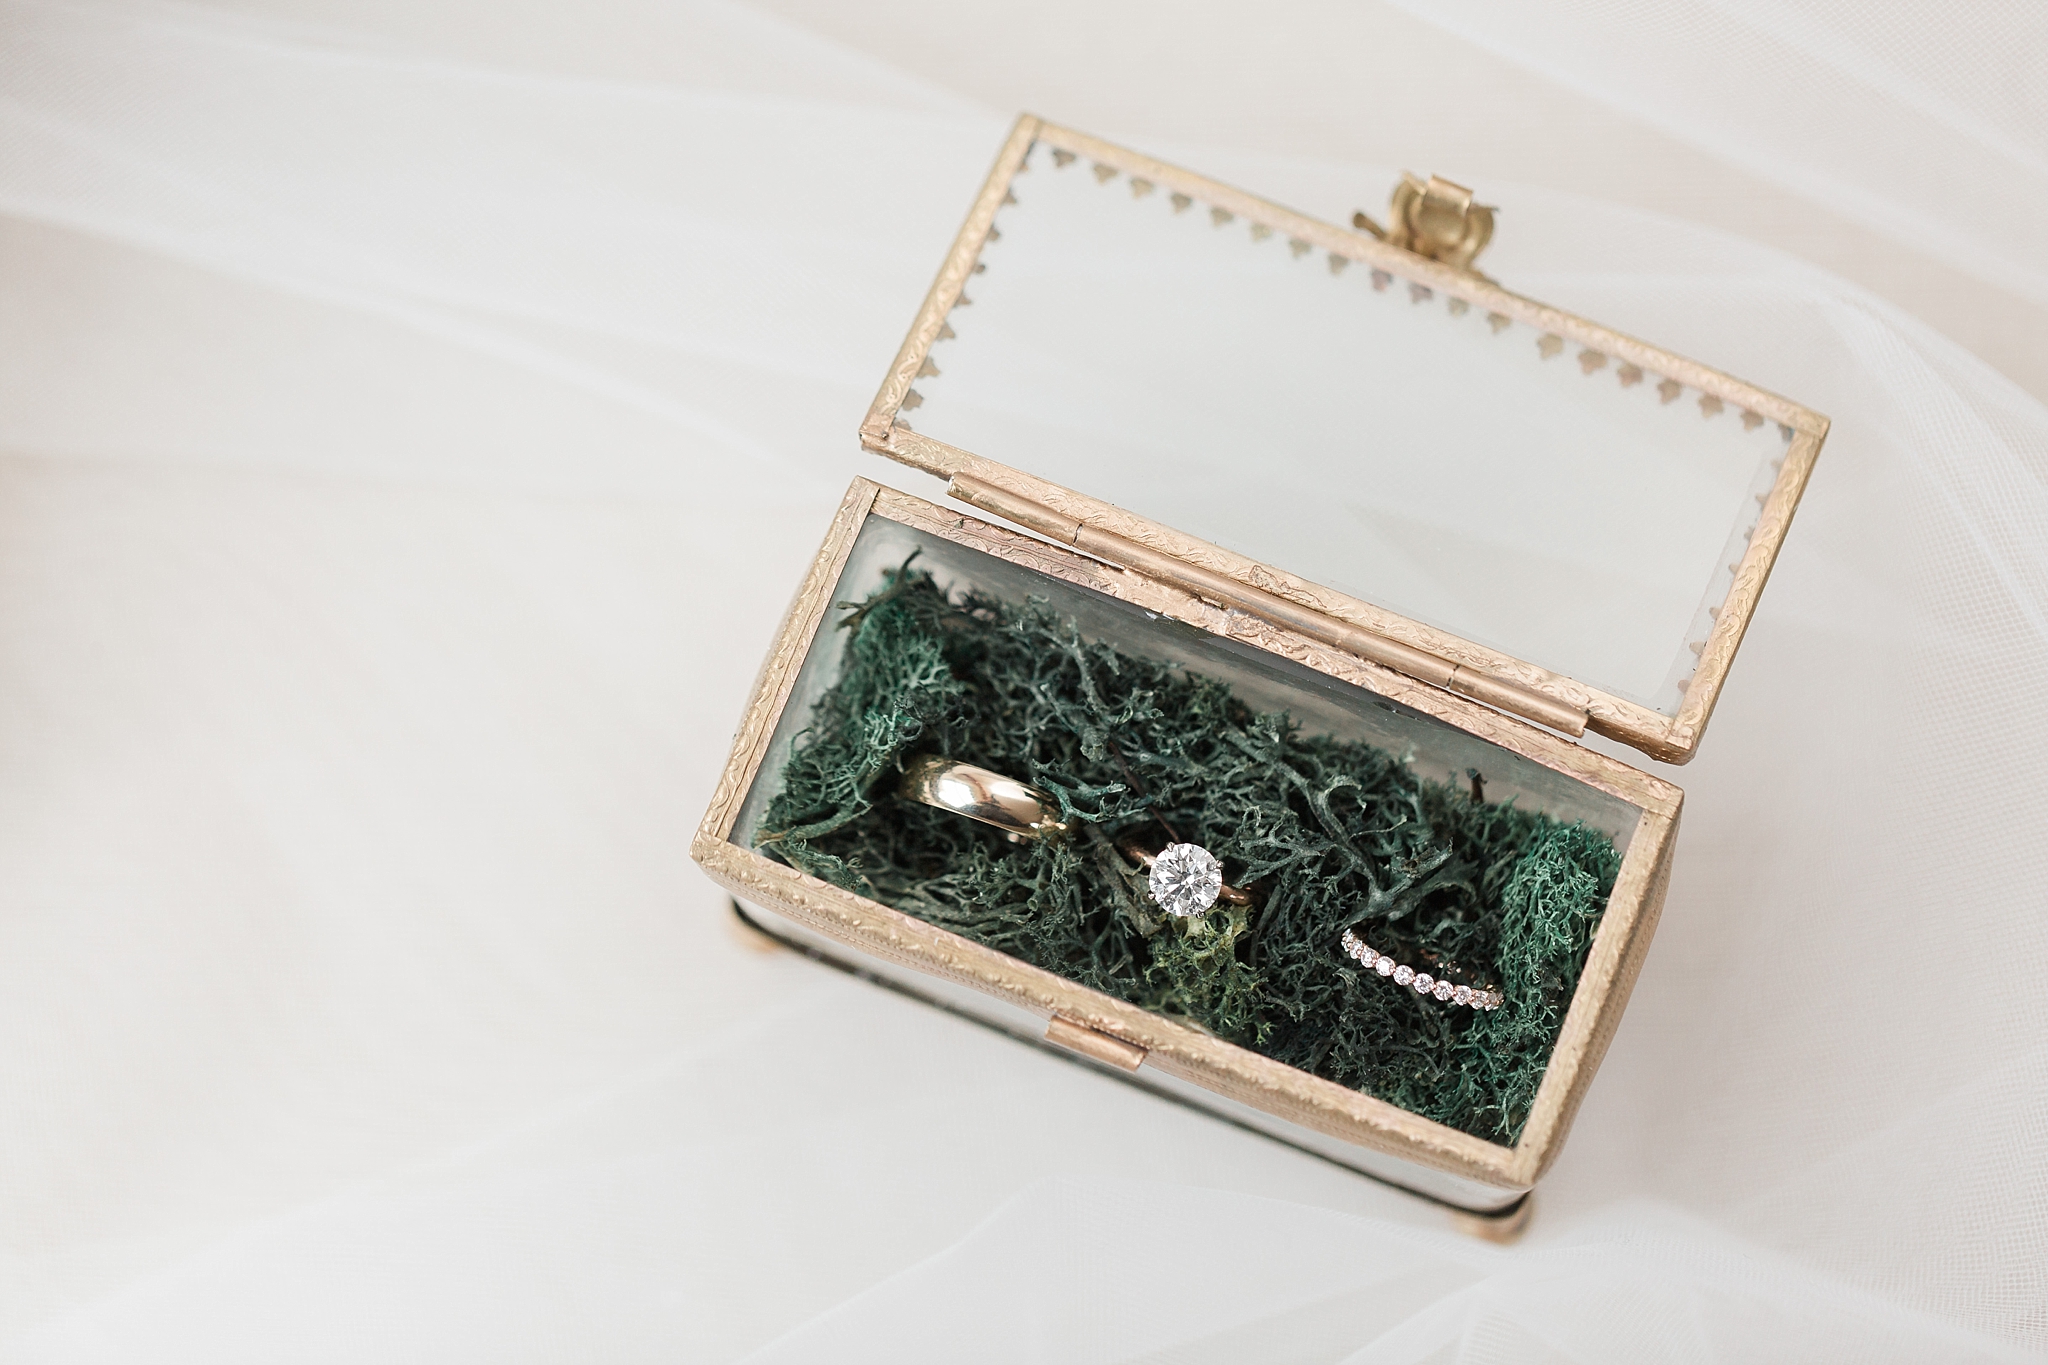 This Washington, DC wedding photographer knows a thing or two about styling details! She is sharing 3 must-have ring boxes for any bride-to-be.